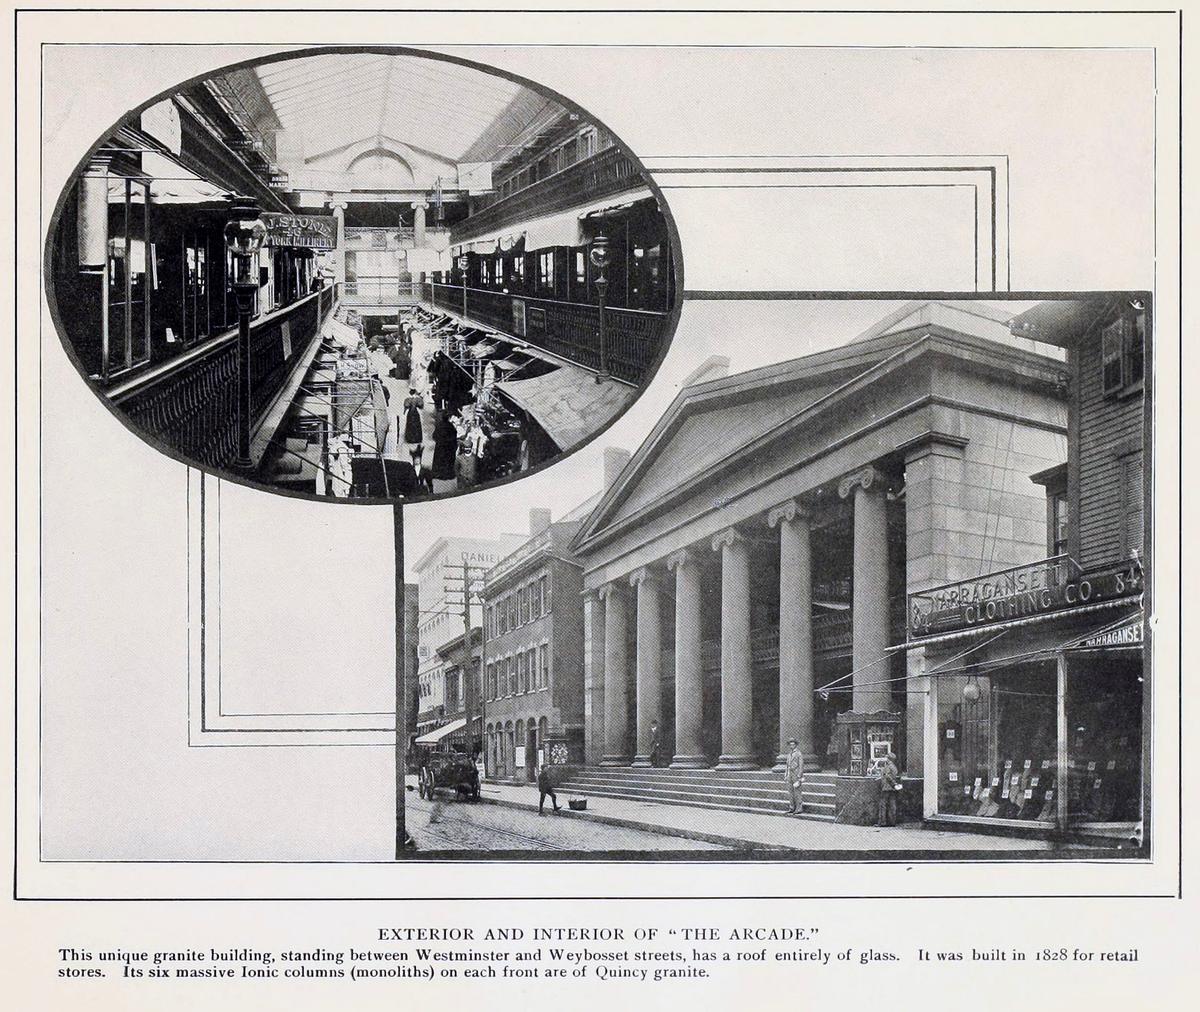 (<a href="https://en.wikipedia.org/wiki/File:Westminster_arcade_from_Views_of_Providence_(1900).jpg#/media/File:Westminster_arcade_from_Views_of_Providence_(1900).jpg">L.H. Nelson Company</a>)